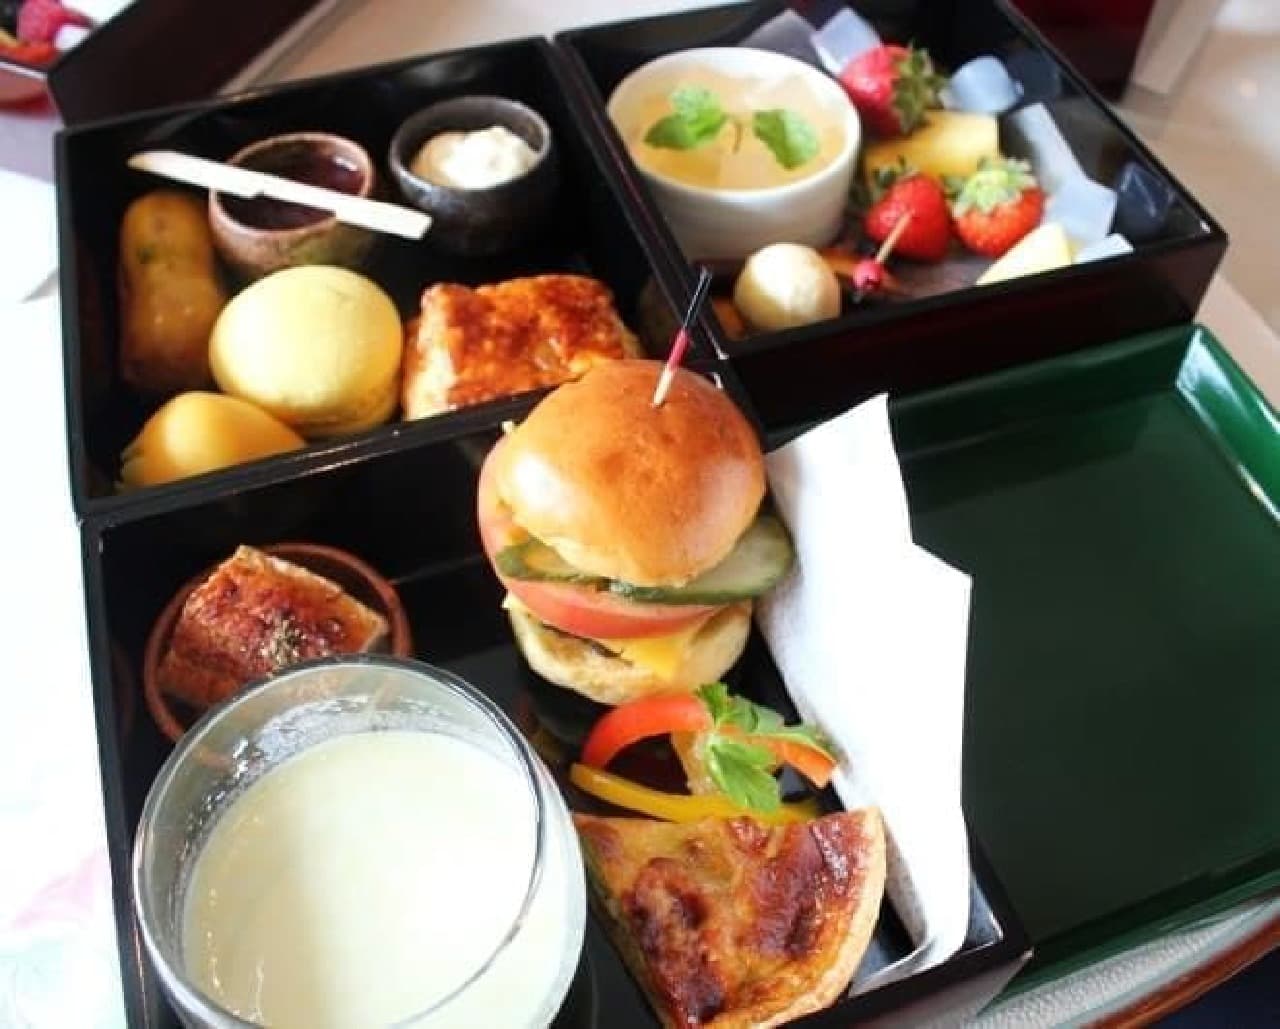 Afternoon tea in a heavy box?